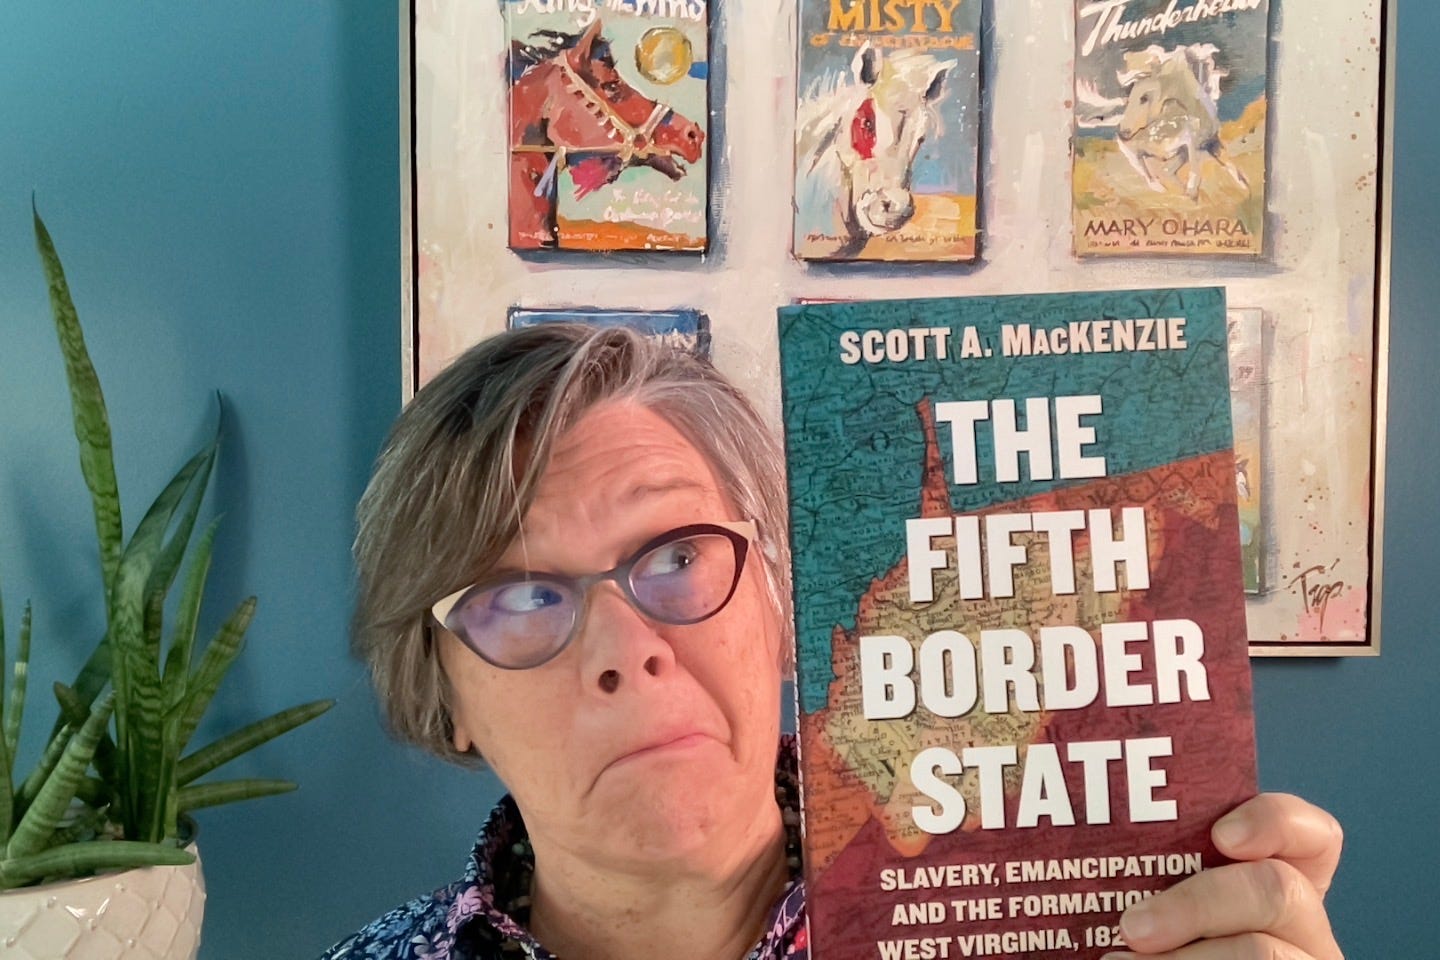 Tamela holding her copy of "The Fifth Border State" book by Scott A. Mackenzie